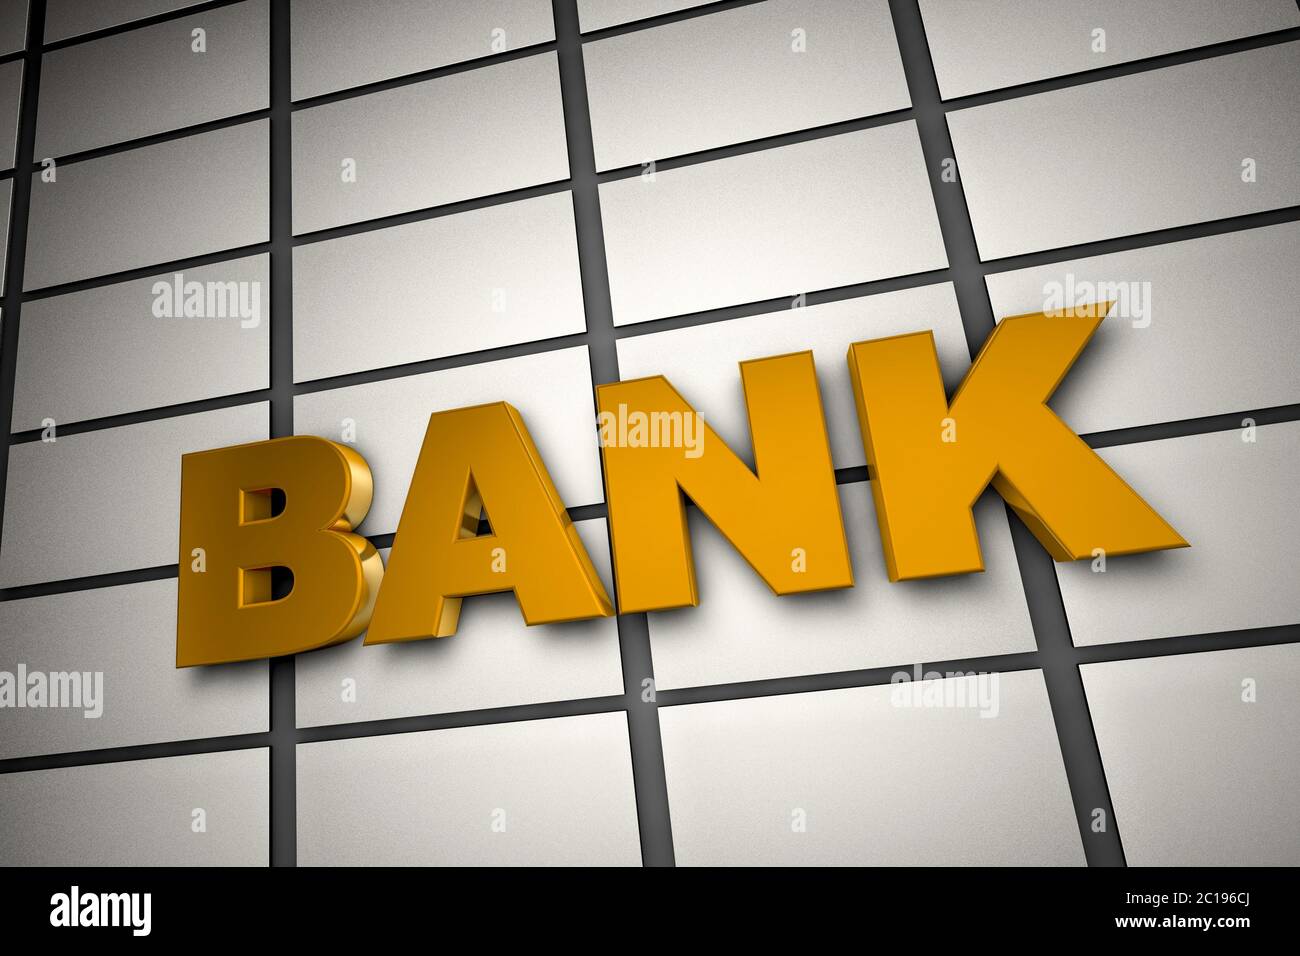 3d text of bank on tile wall Stock Photo